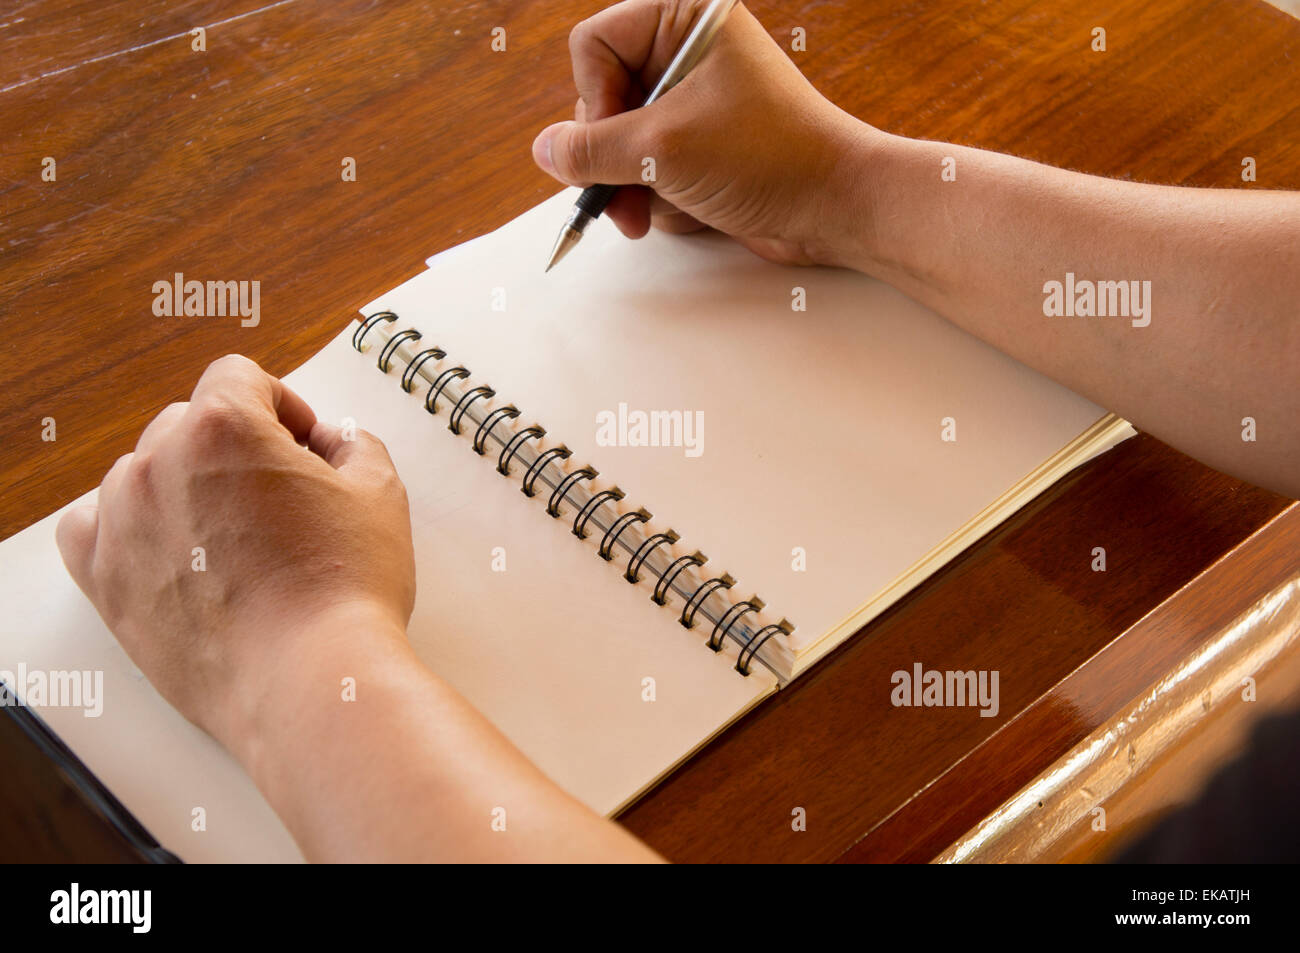 man working table book pen booklet top Stock Photo